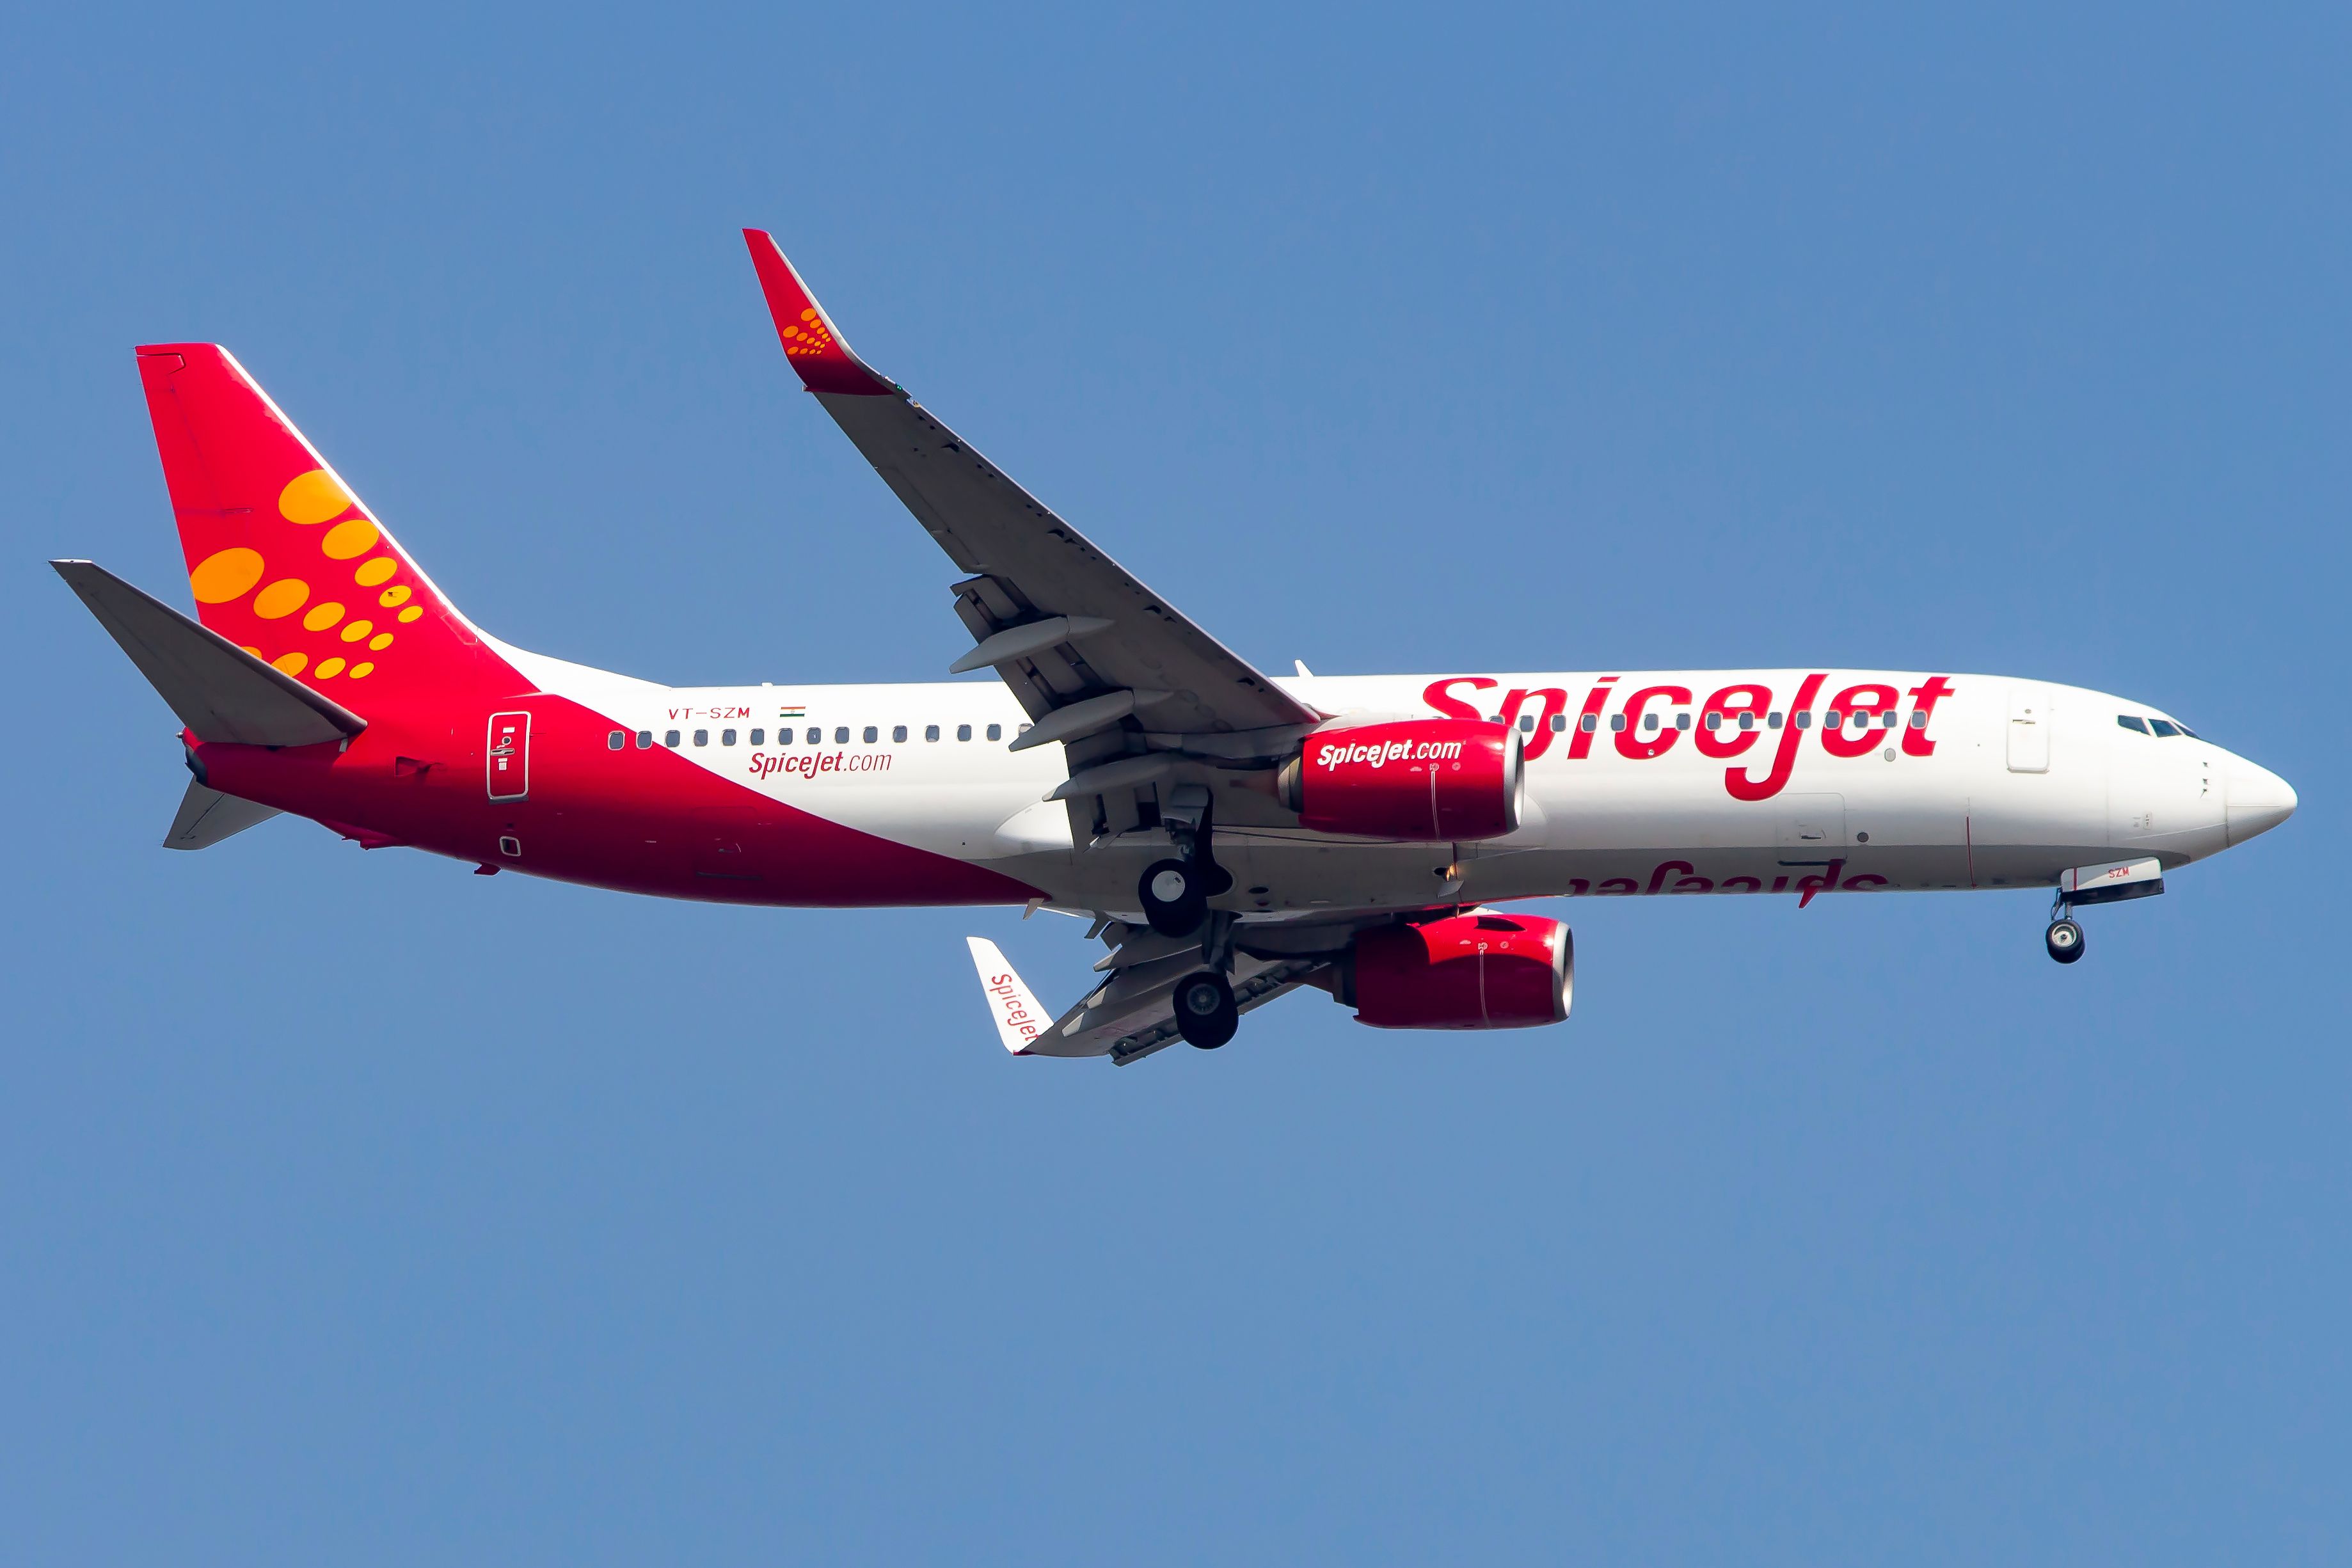 A SpiceJet Boeing 737-800 flying in the sky.